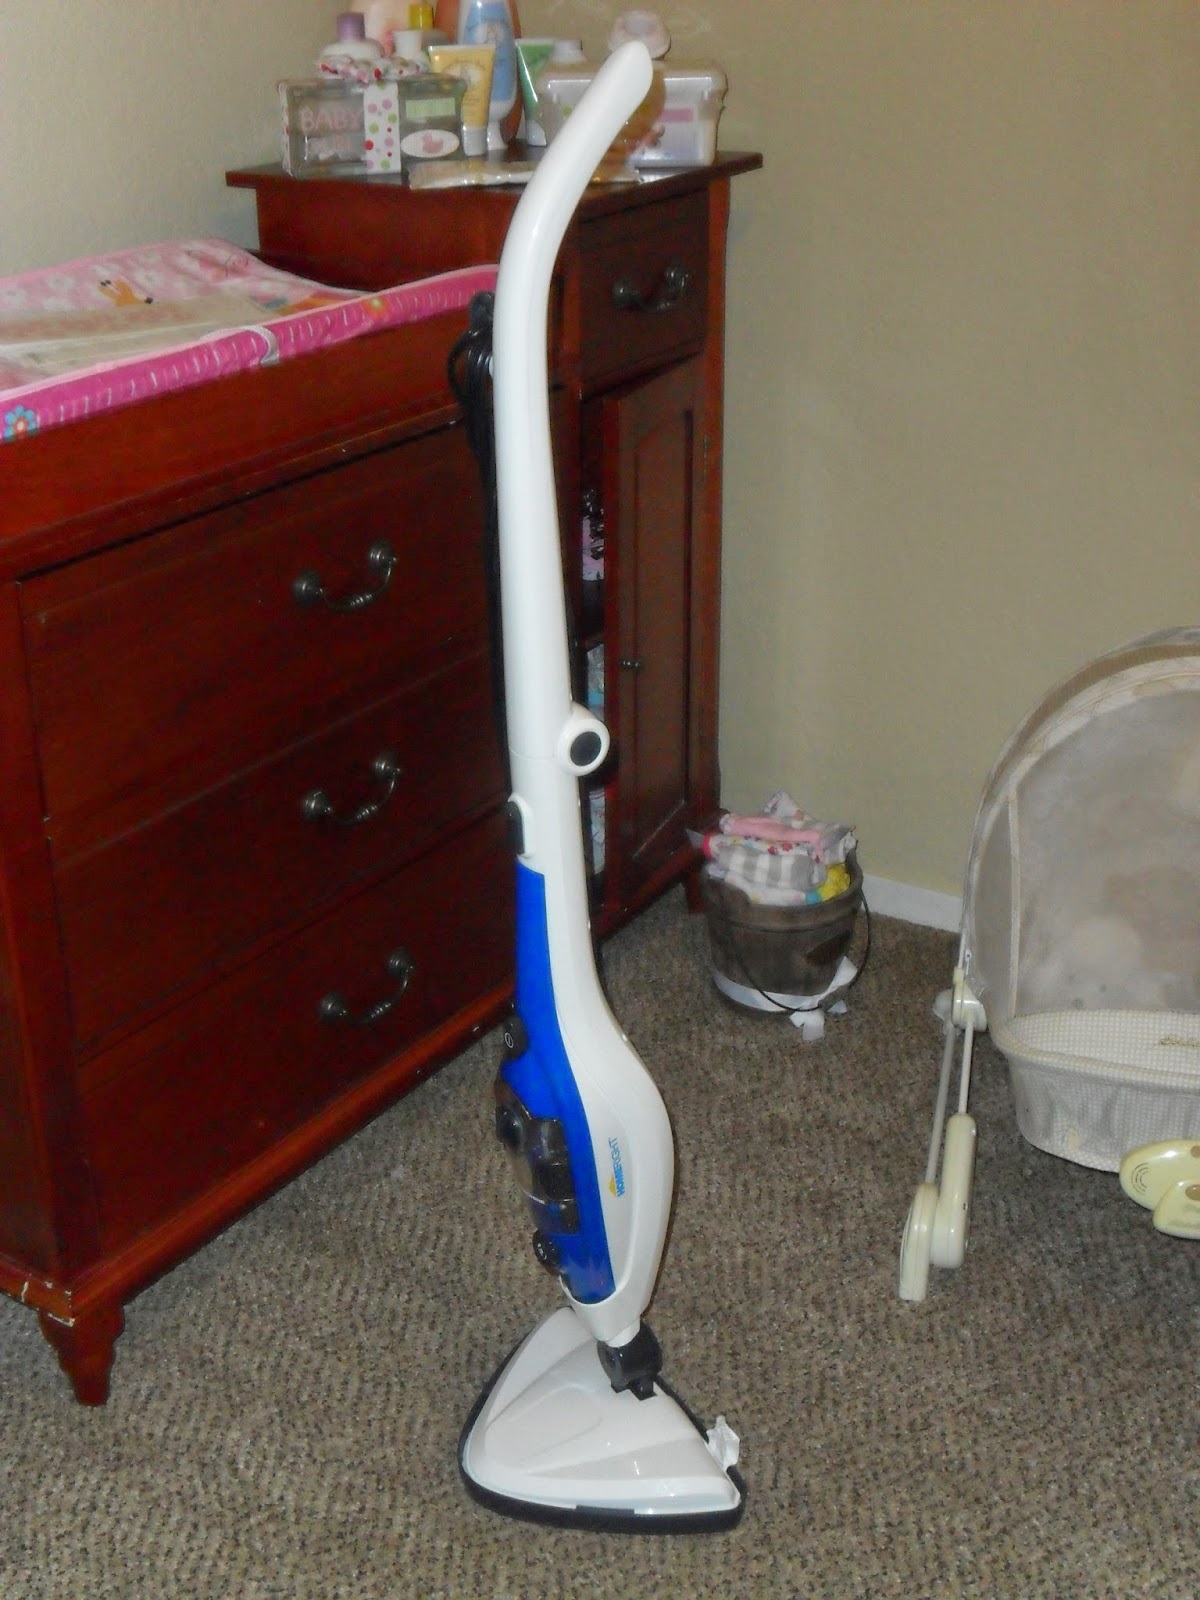 Nursery Cleaning and Home Right Steam Machine plus. Review